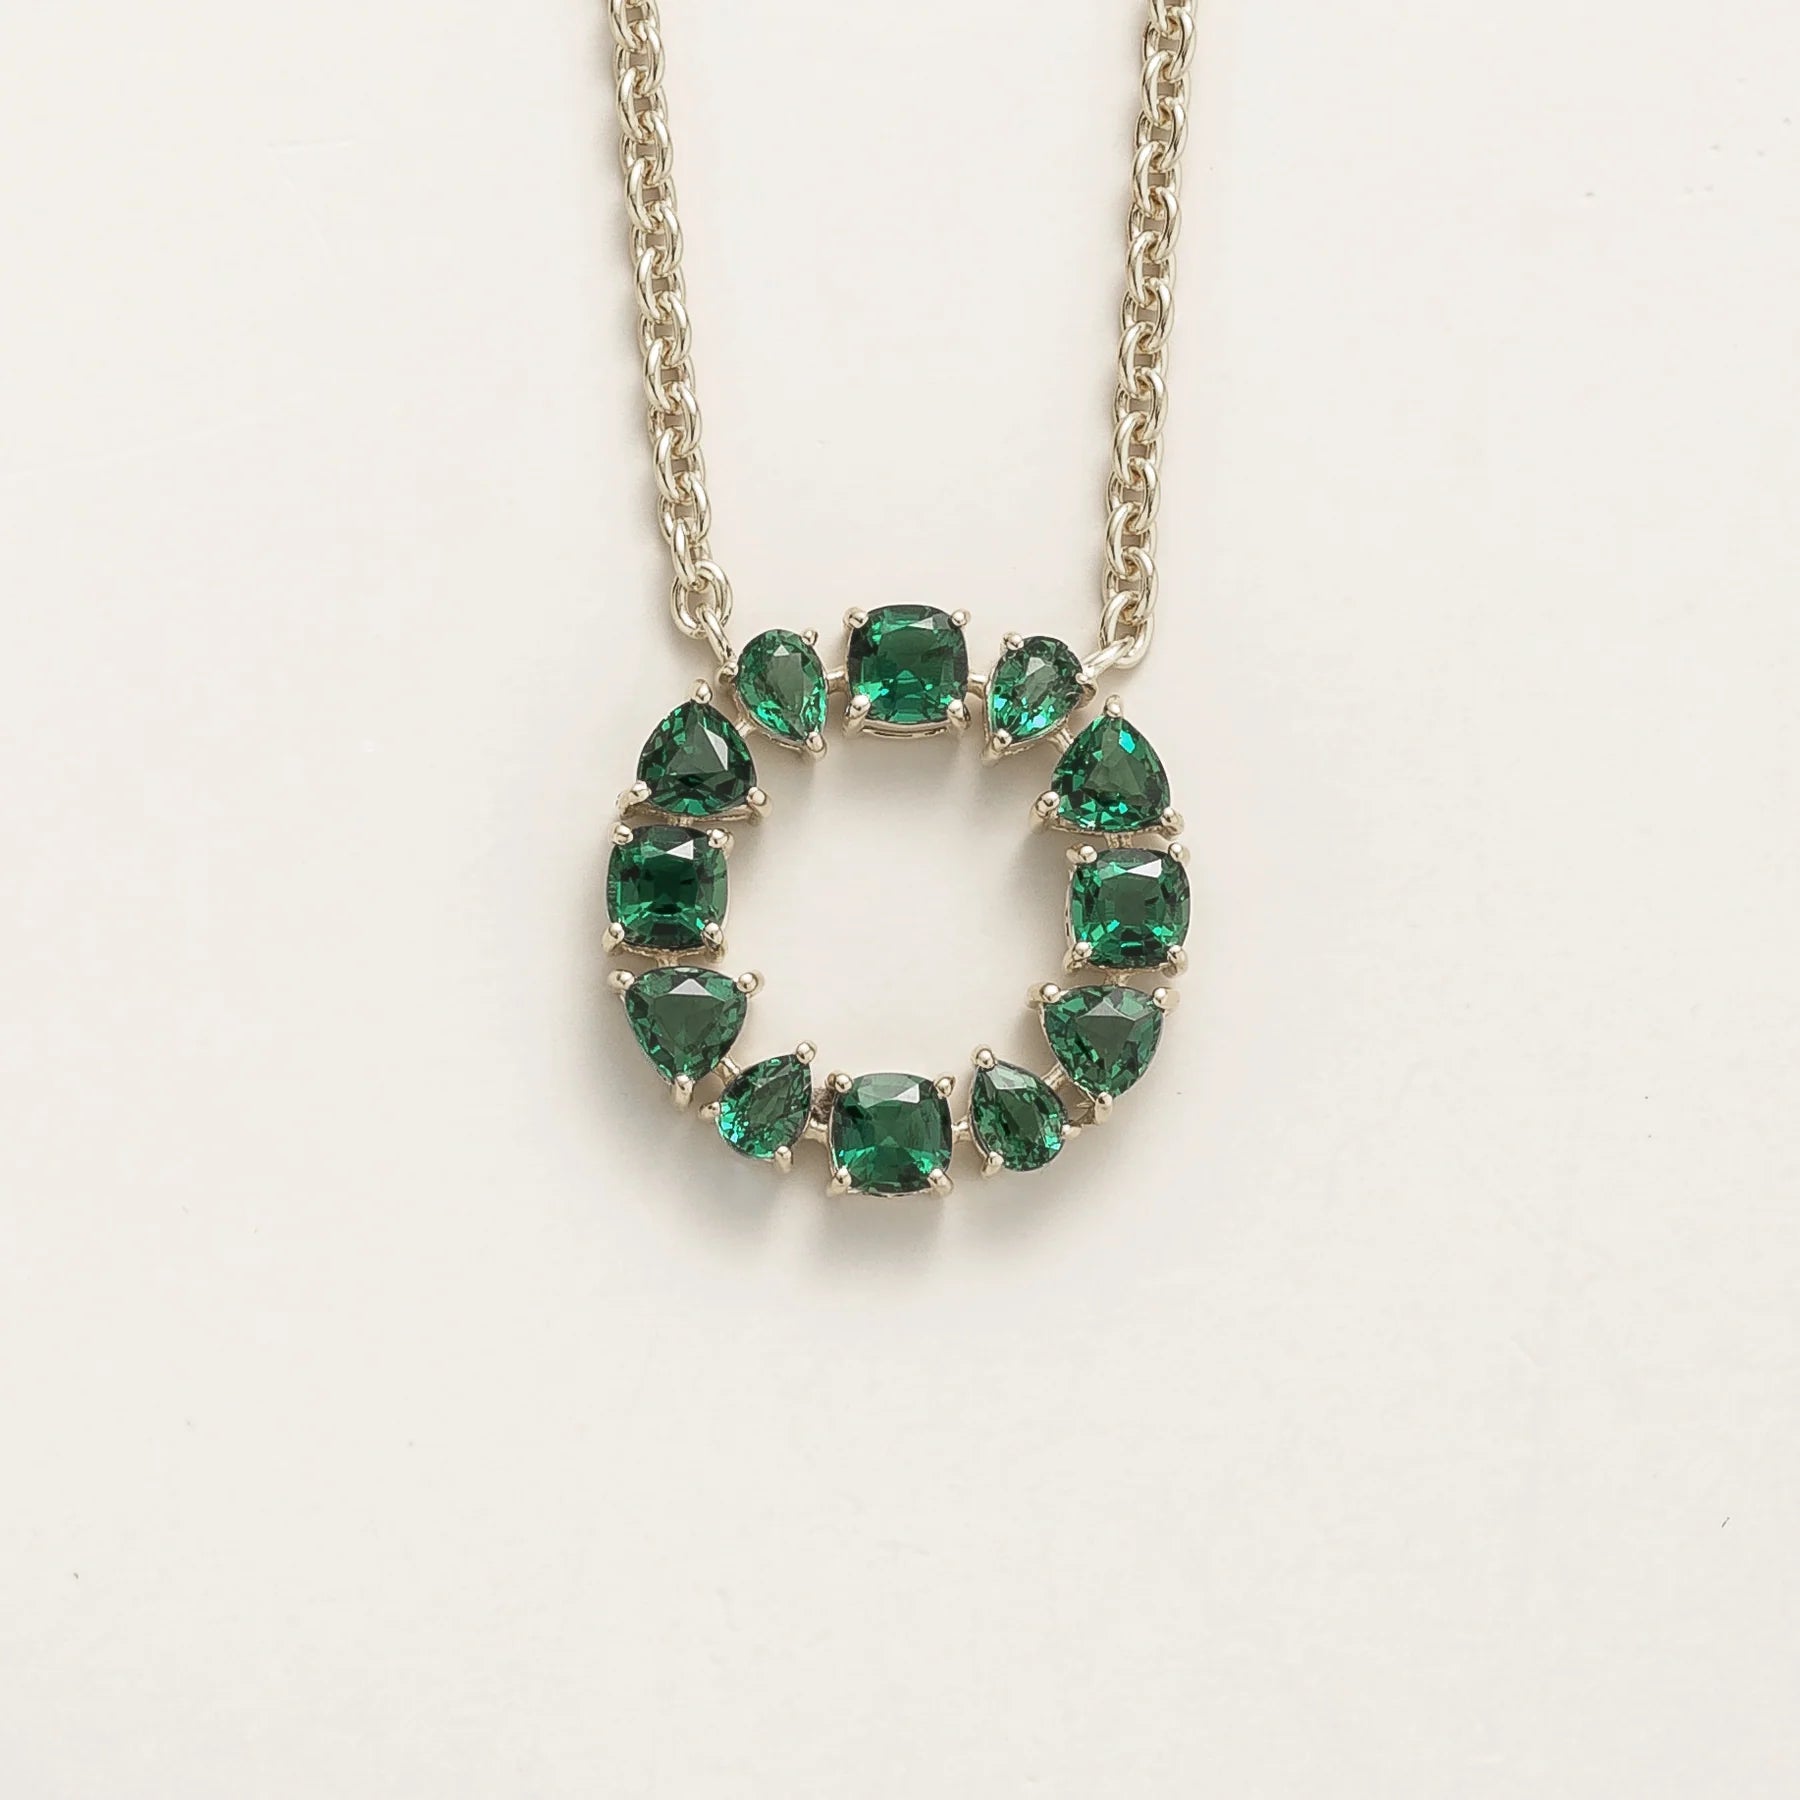 Emerald Earrings Juvetti Jewellery London Glorie White Gold Necklace Set With Emerald